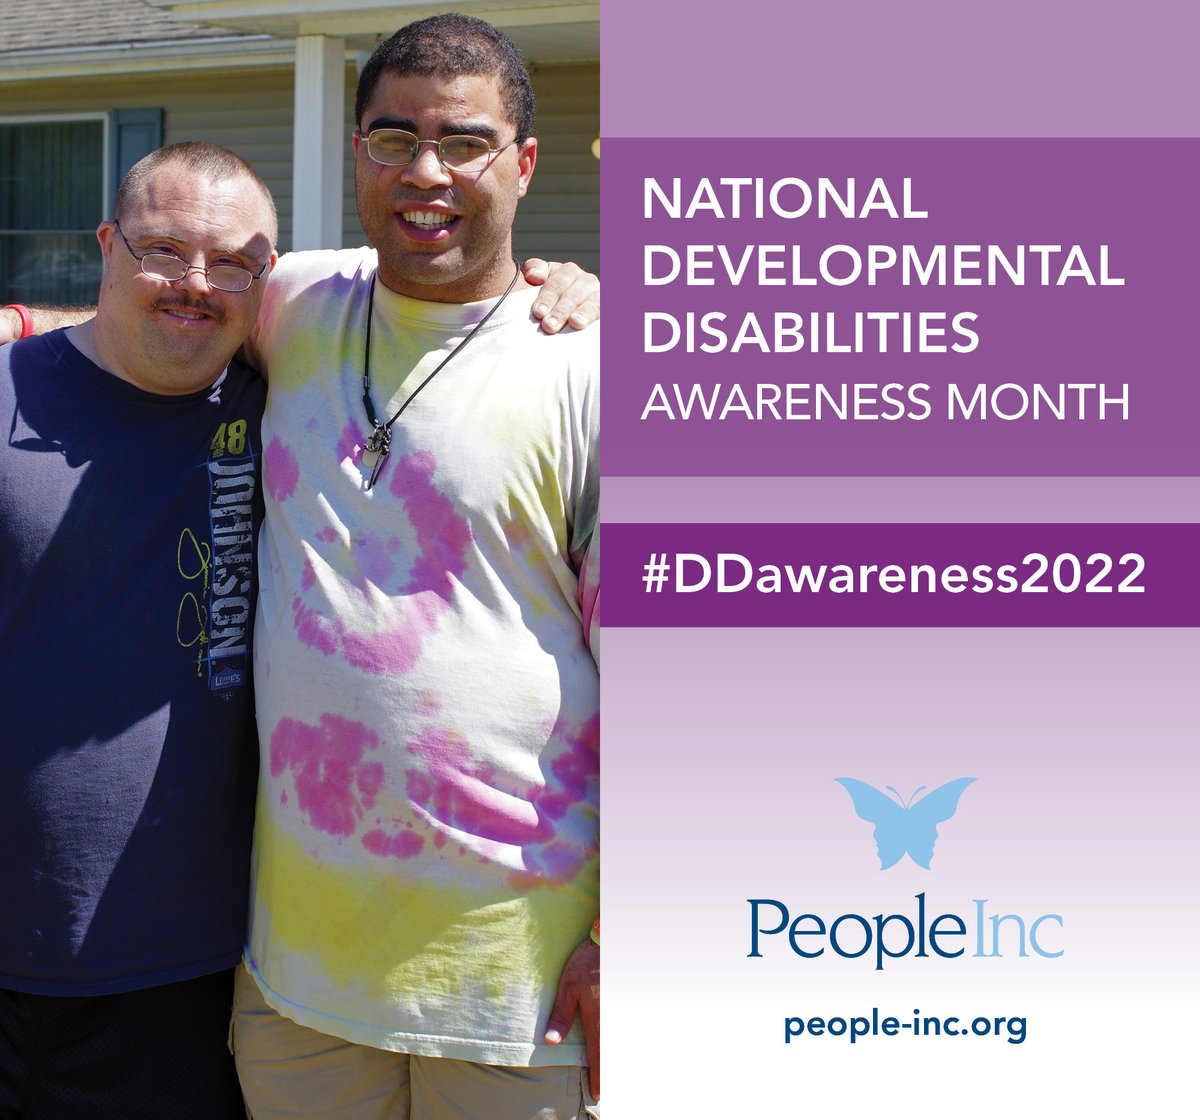 It’s National Developmental Disabilities Awareness Month! Now, and all year long, we acknowledge the accomplishments of people with developmental disabilities. #DDawareness2022 #DDAM2022 #Inclusion #WorldsImagined